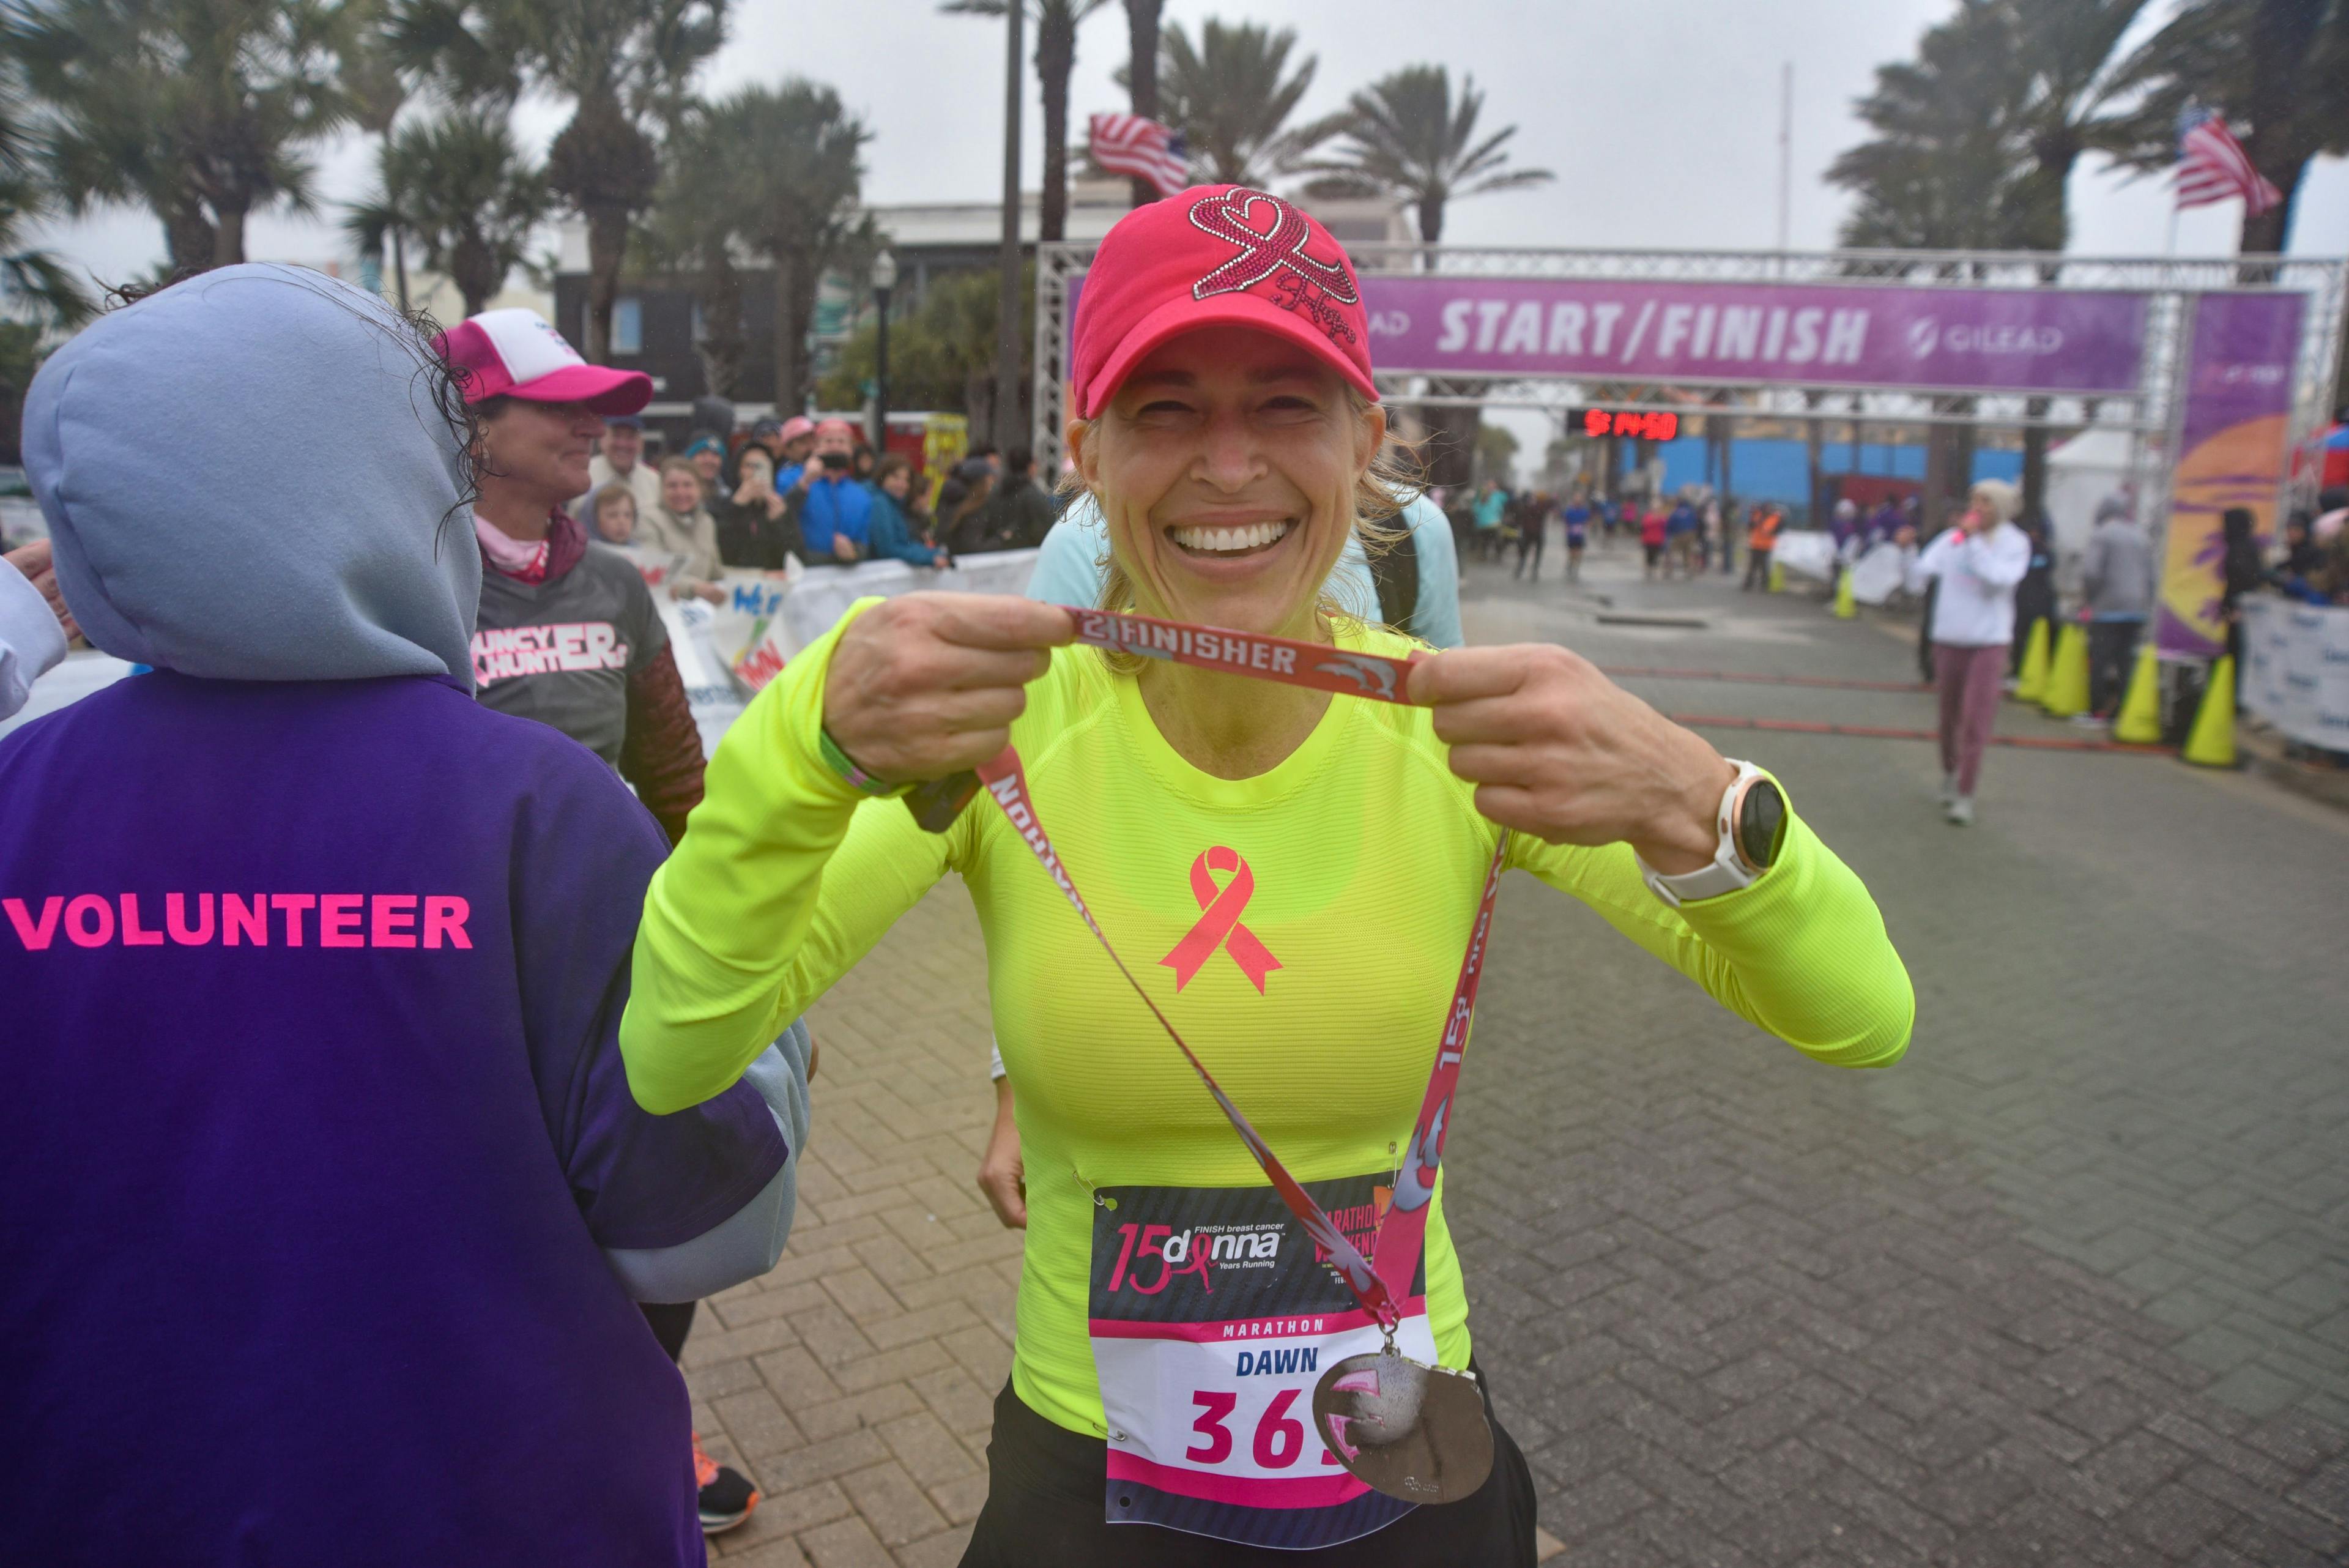 Dr. Dawn Mussallem in a bright yellow shirt and pink hat, both with breast cancer ribbons on it, showing off her medal at the finish line of The DONNA Foundaton marathon | Photo credit: The DONNA Foundation